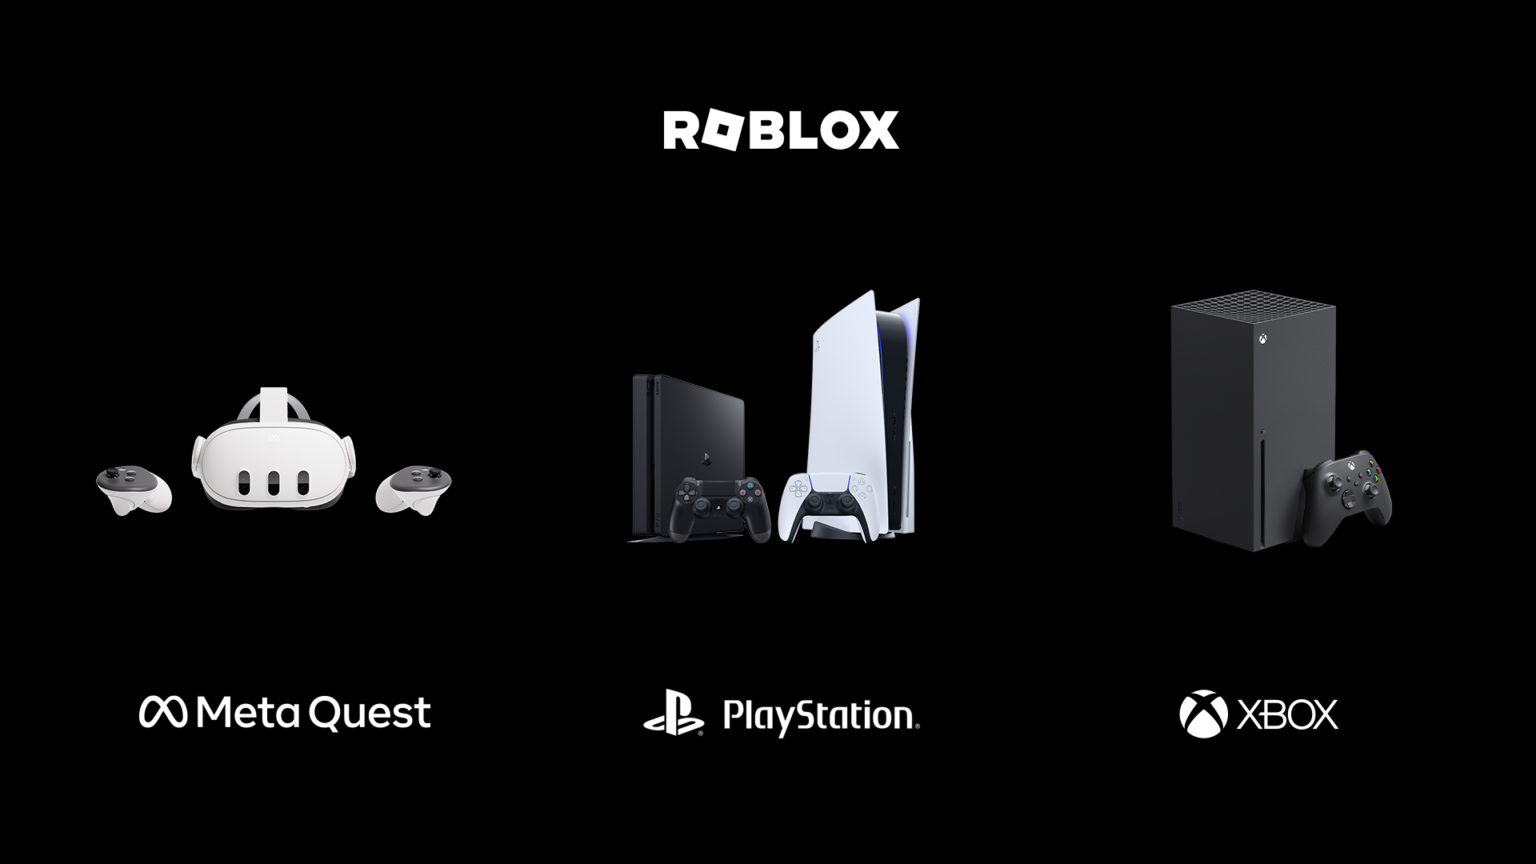 Roblox to offer dating features? Here's everything announced at